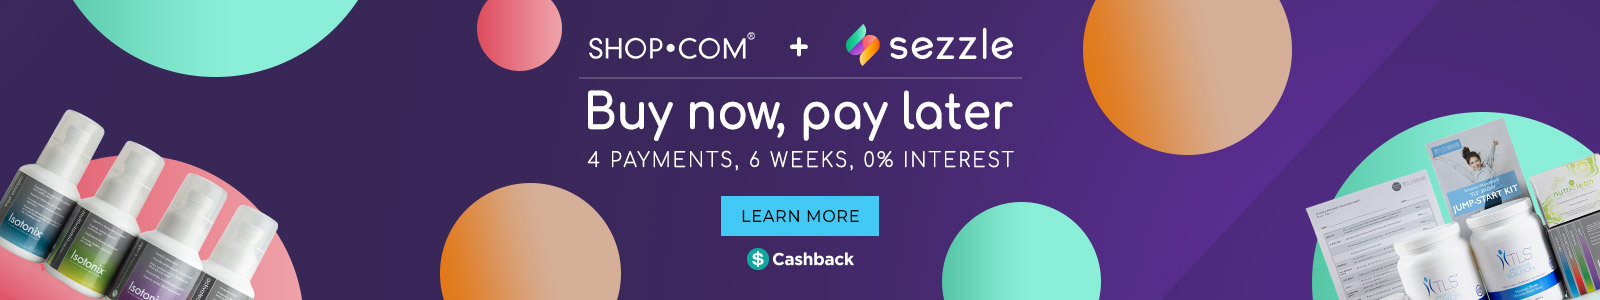 Sezzle buy now pay later, 4 payments, 6 weeks, 0% interest. Learn more cashback.